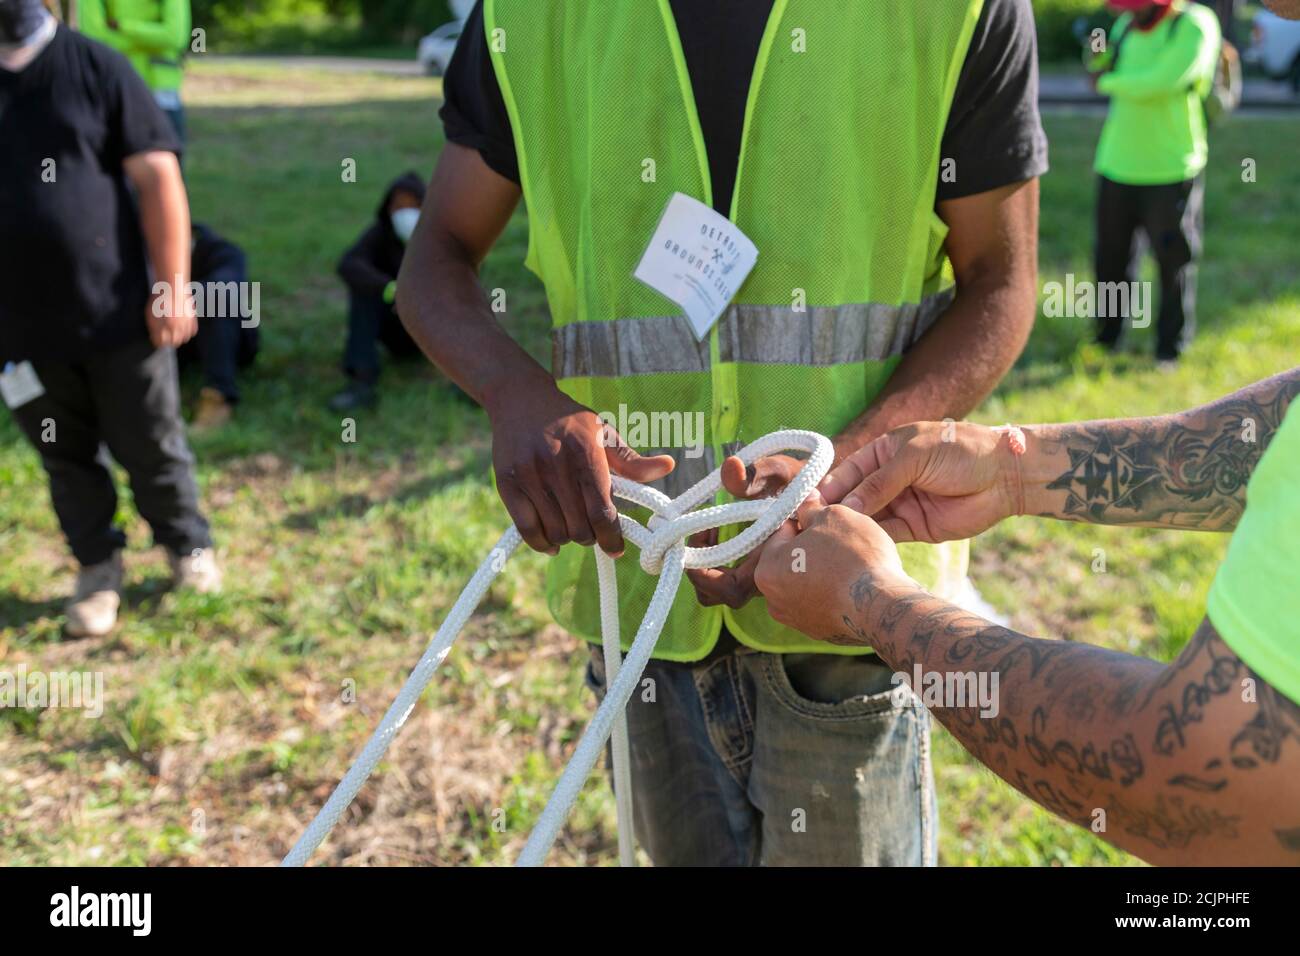 Detroit, Michigan - Workers from the Detroit Grounds Crew learn how to use the ropes they will need in taking down dead or unwanted trees. Stock Photo